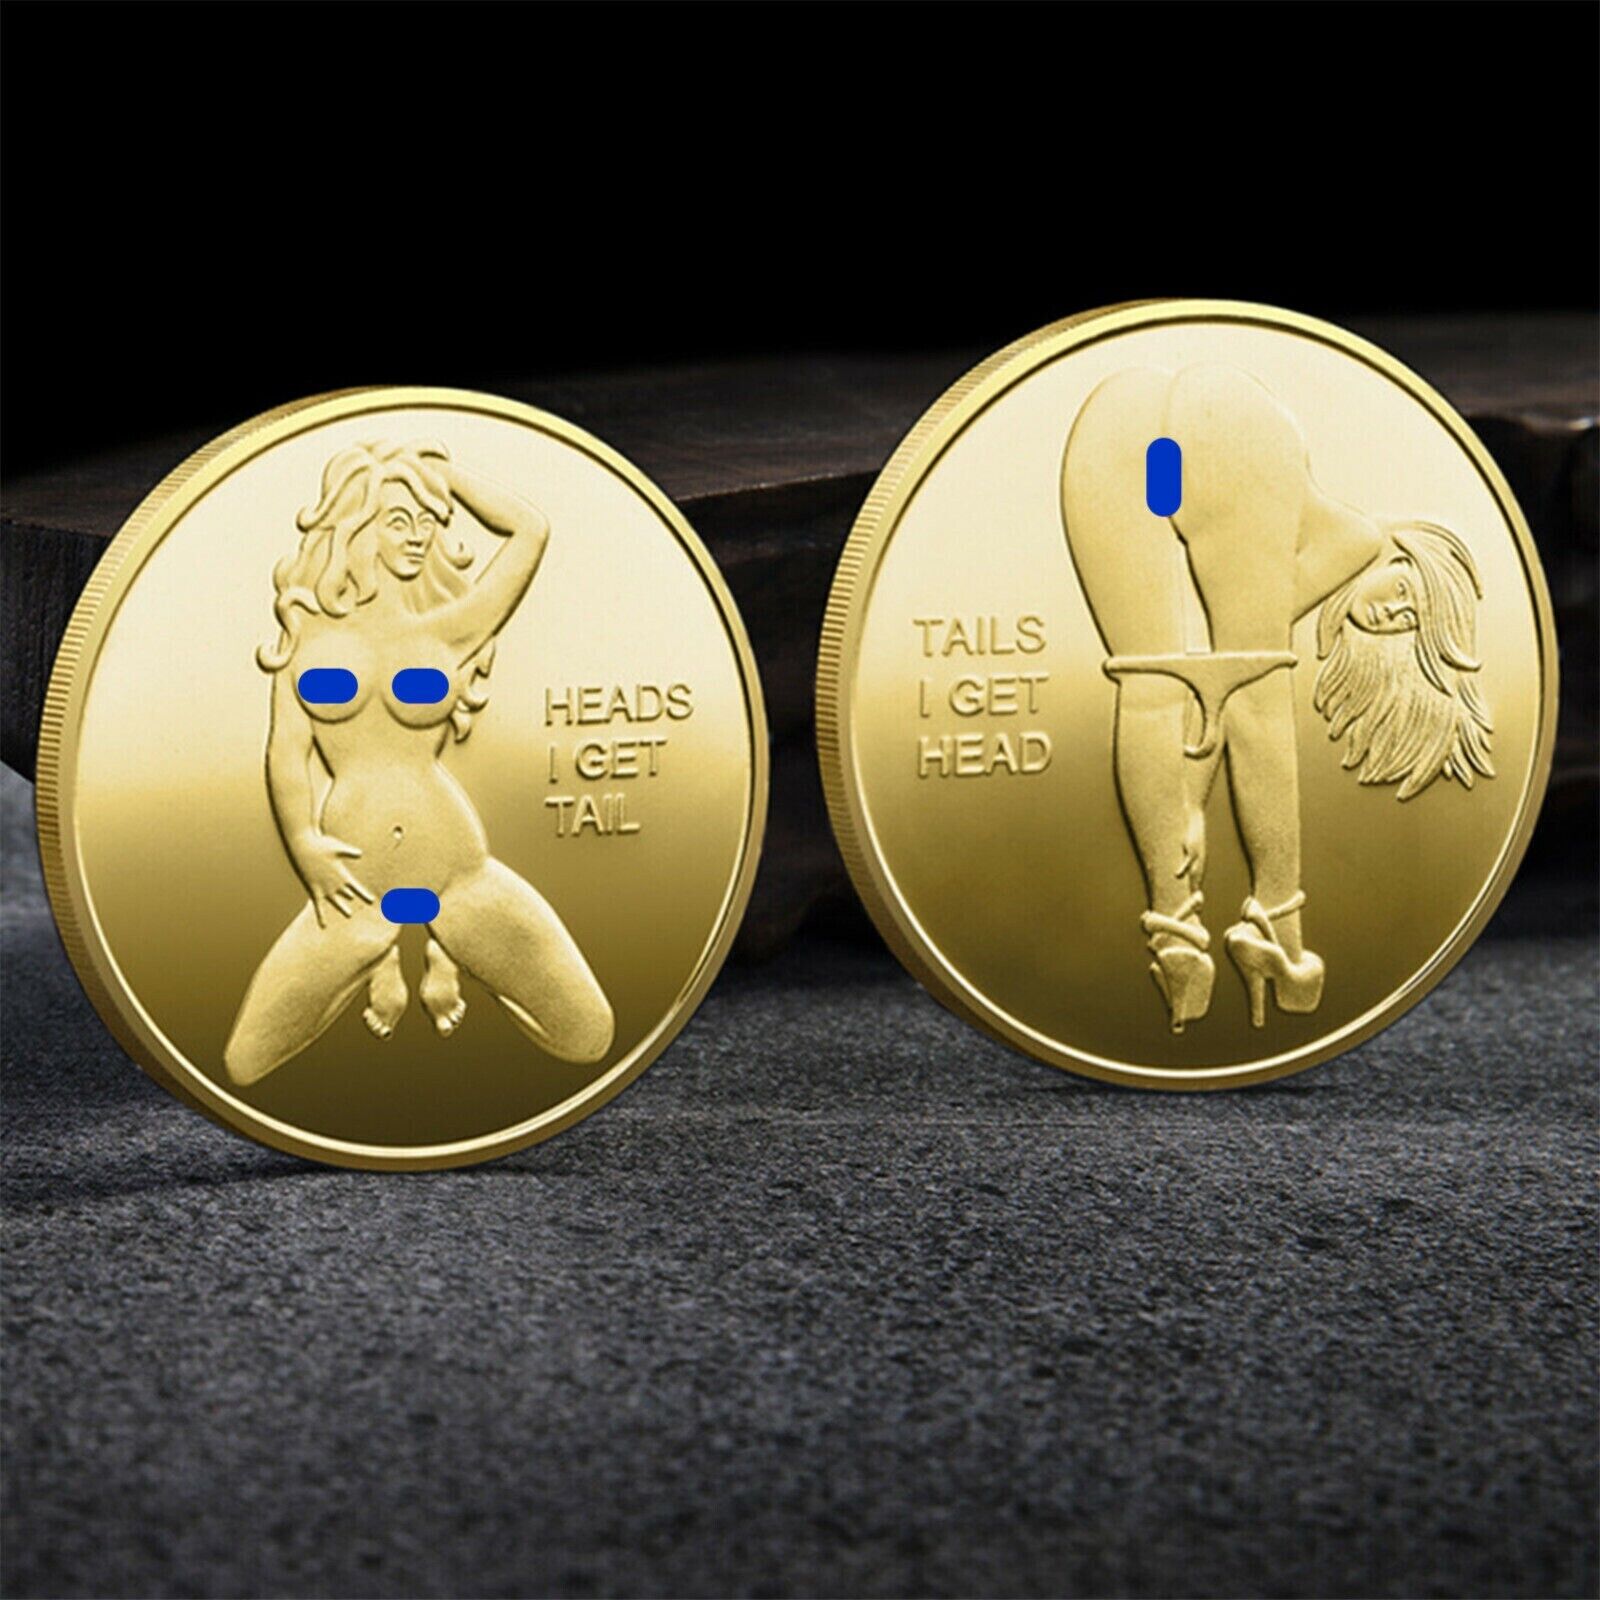 Tails I Get Head  Heads I Get Tail  Sexy Lady Heads Tails Challenge Token Coin